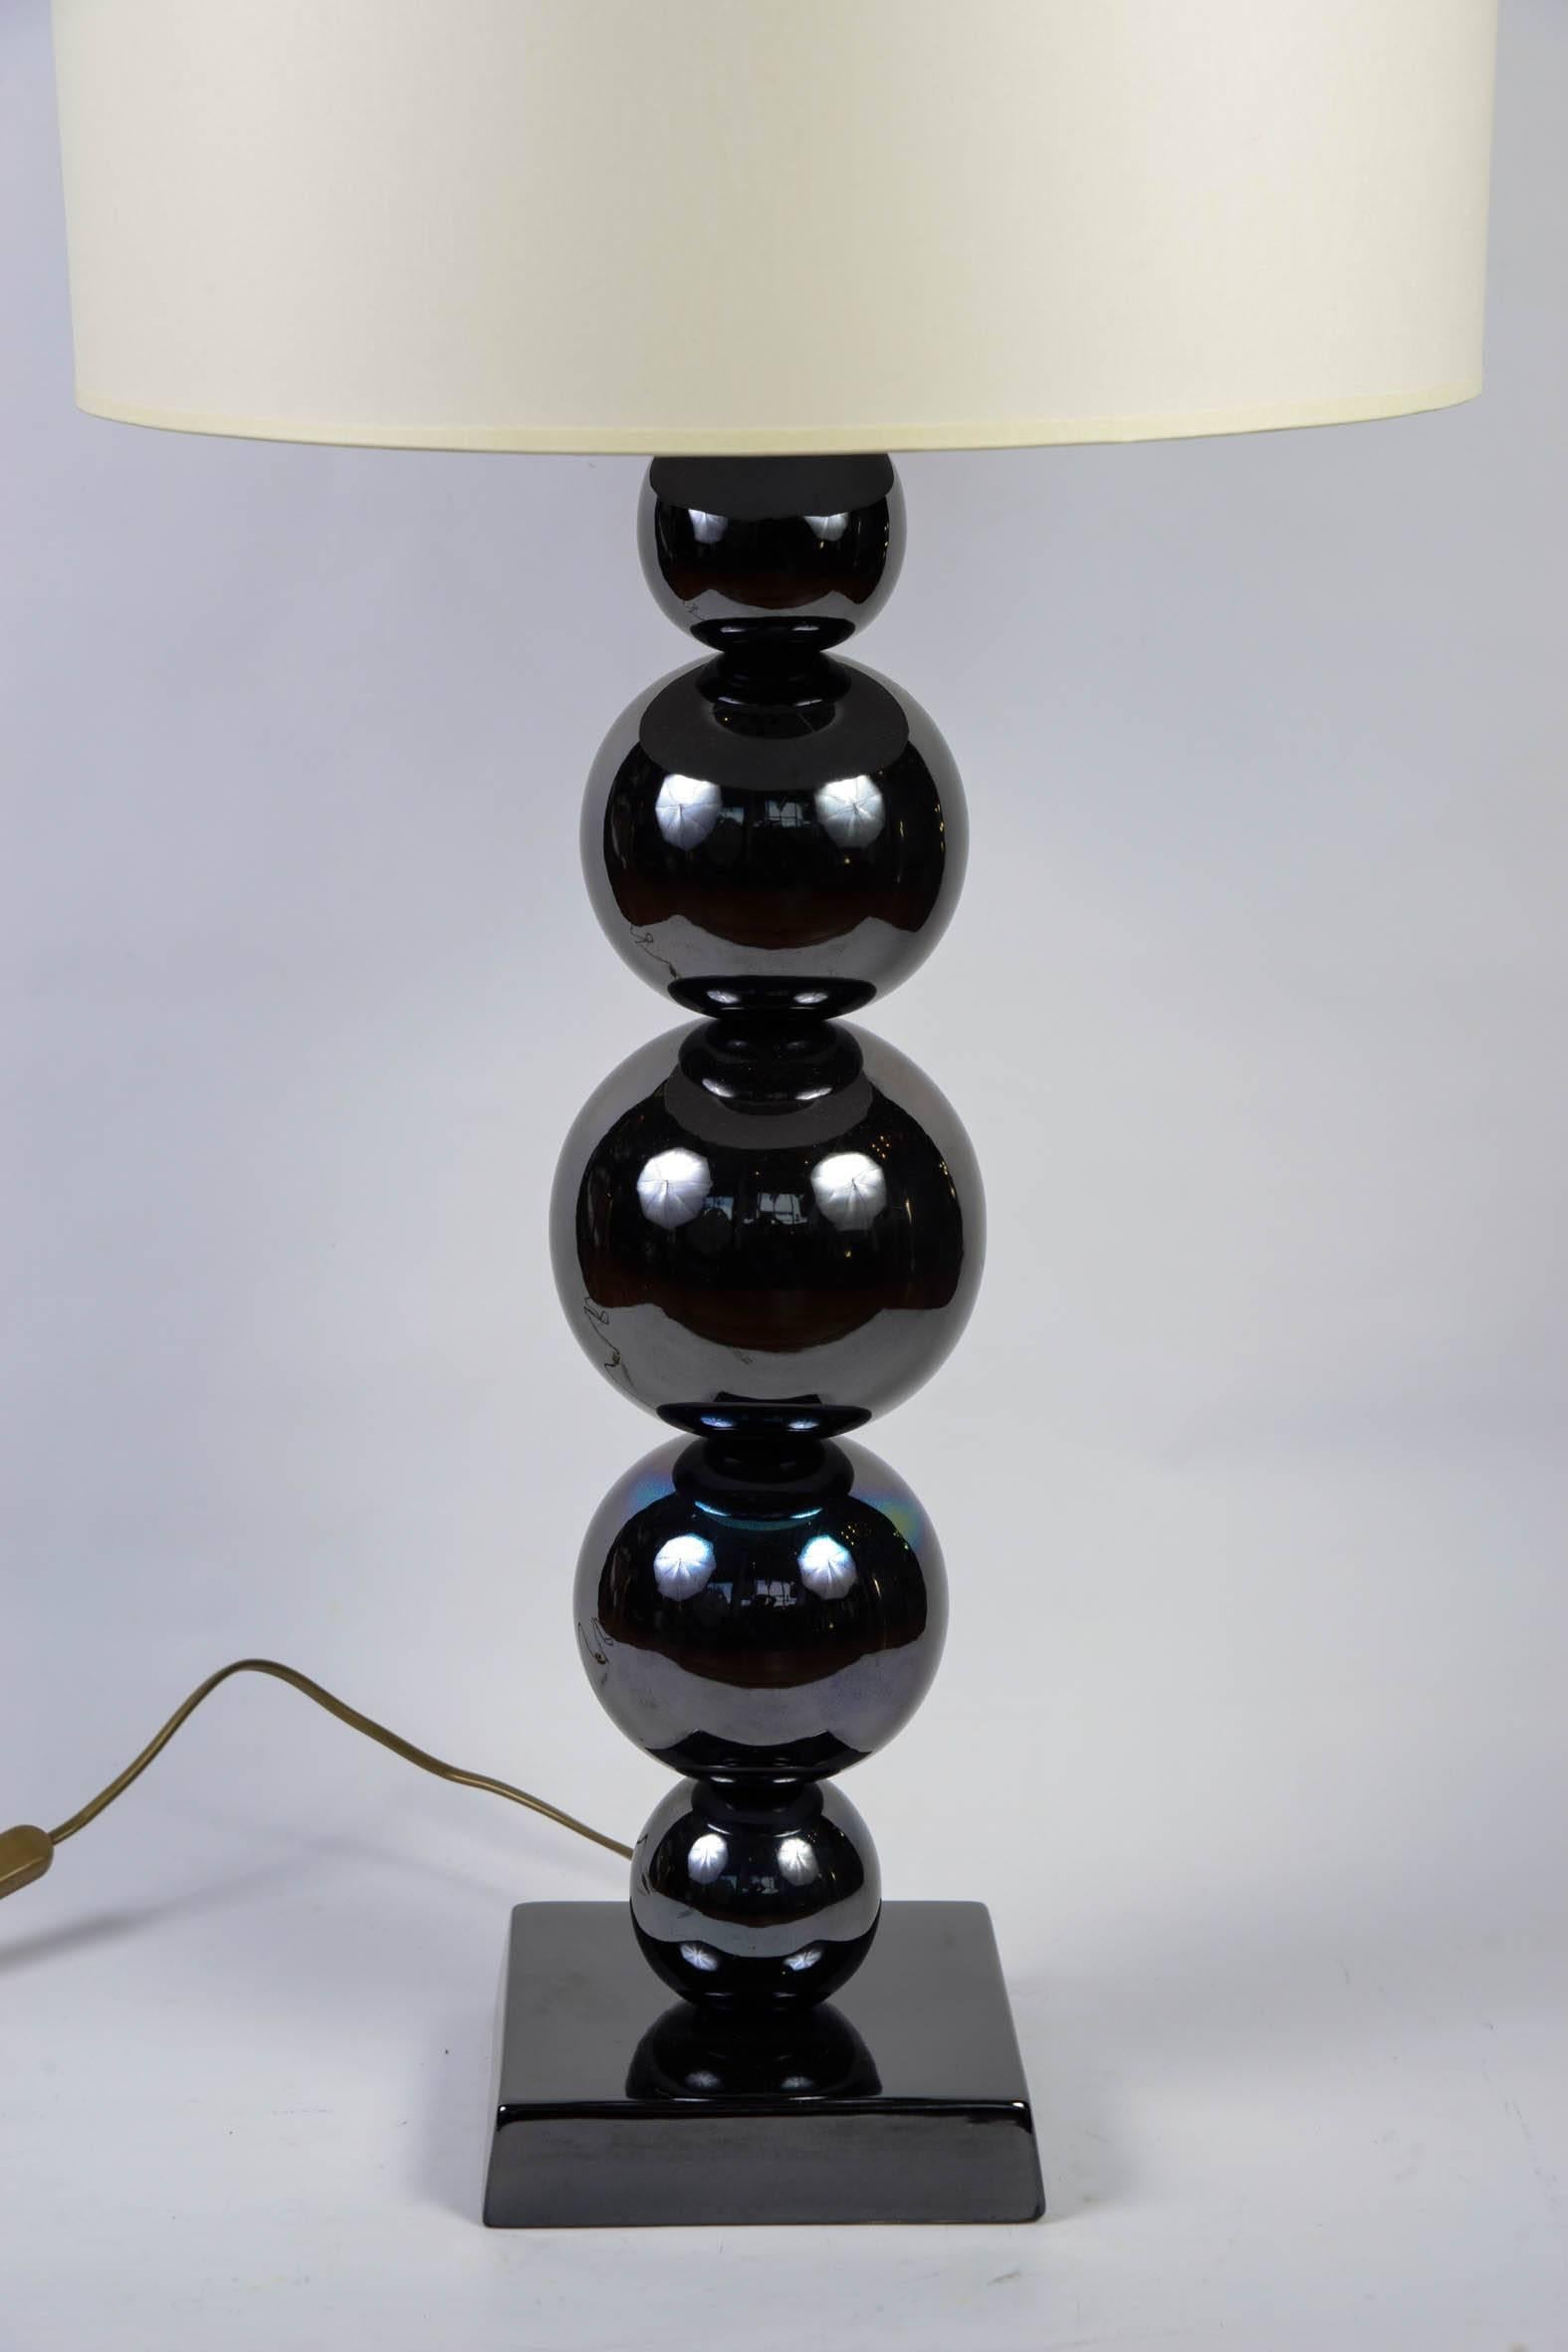 Pair of lamps made of different sizes balls threaded vertically, all made in deep blue metal.